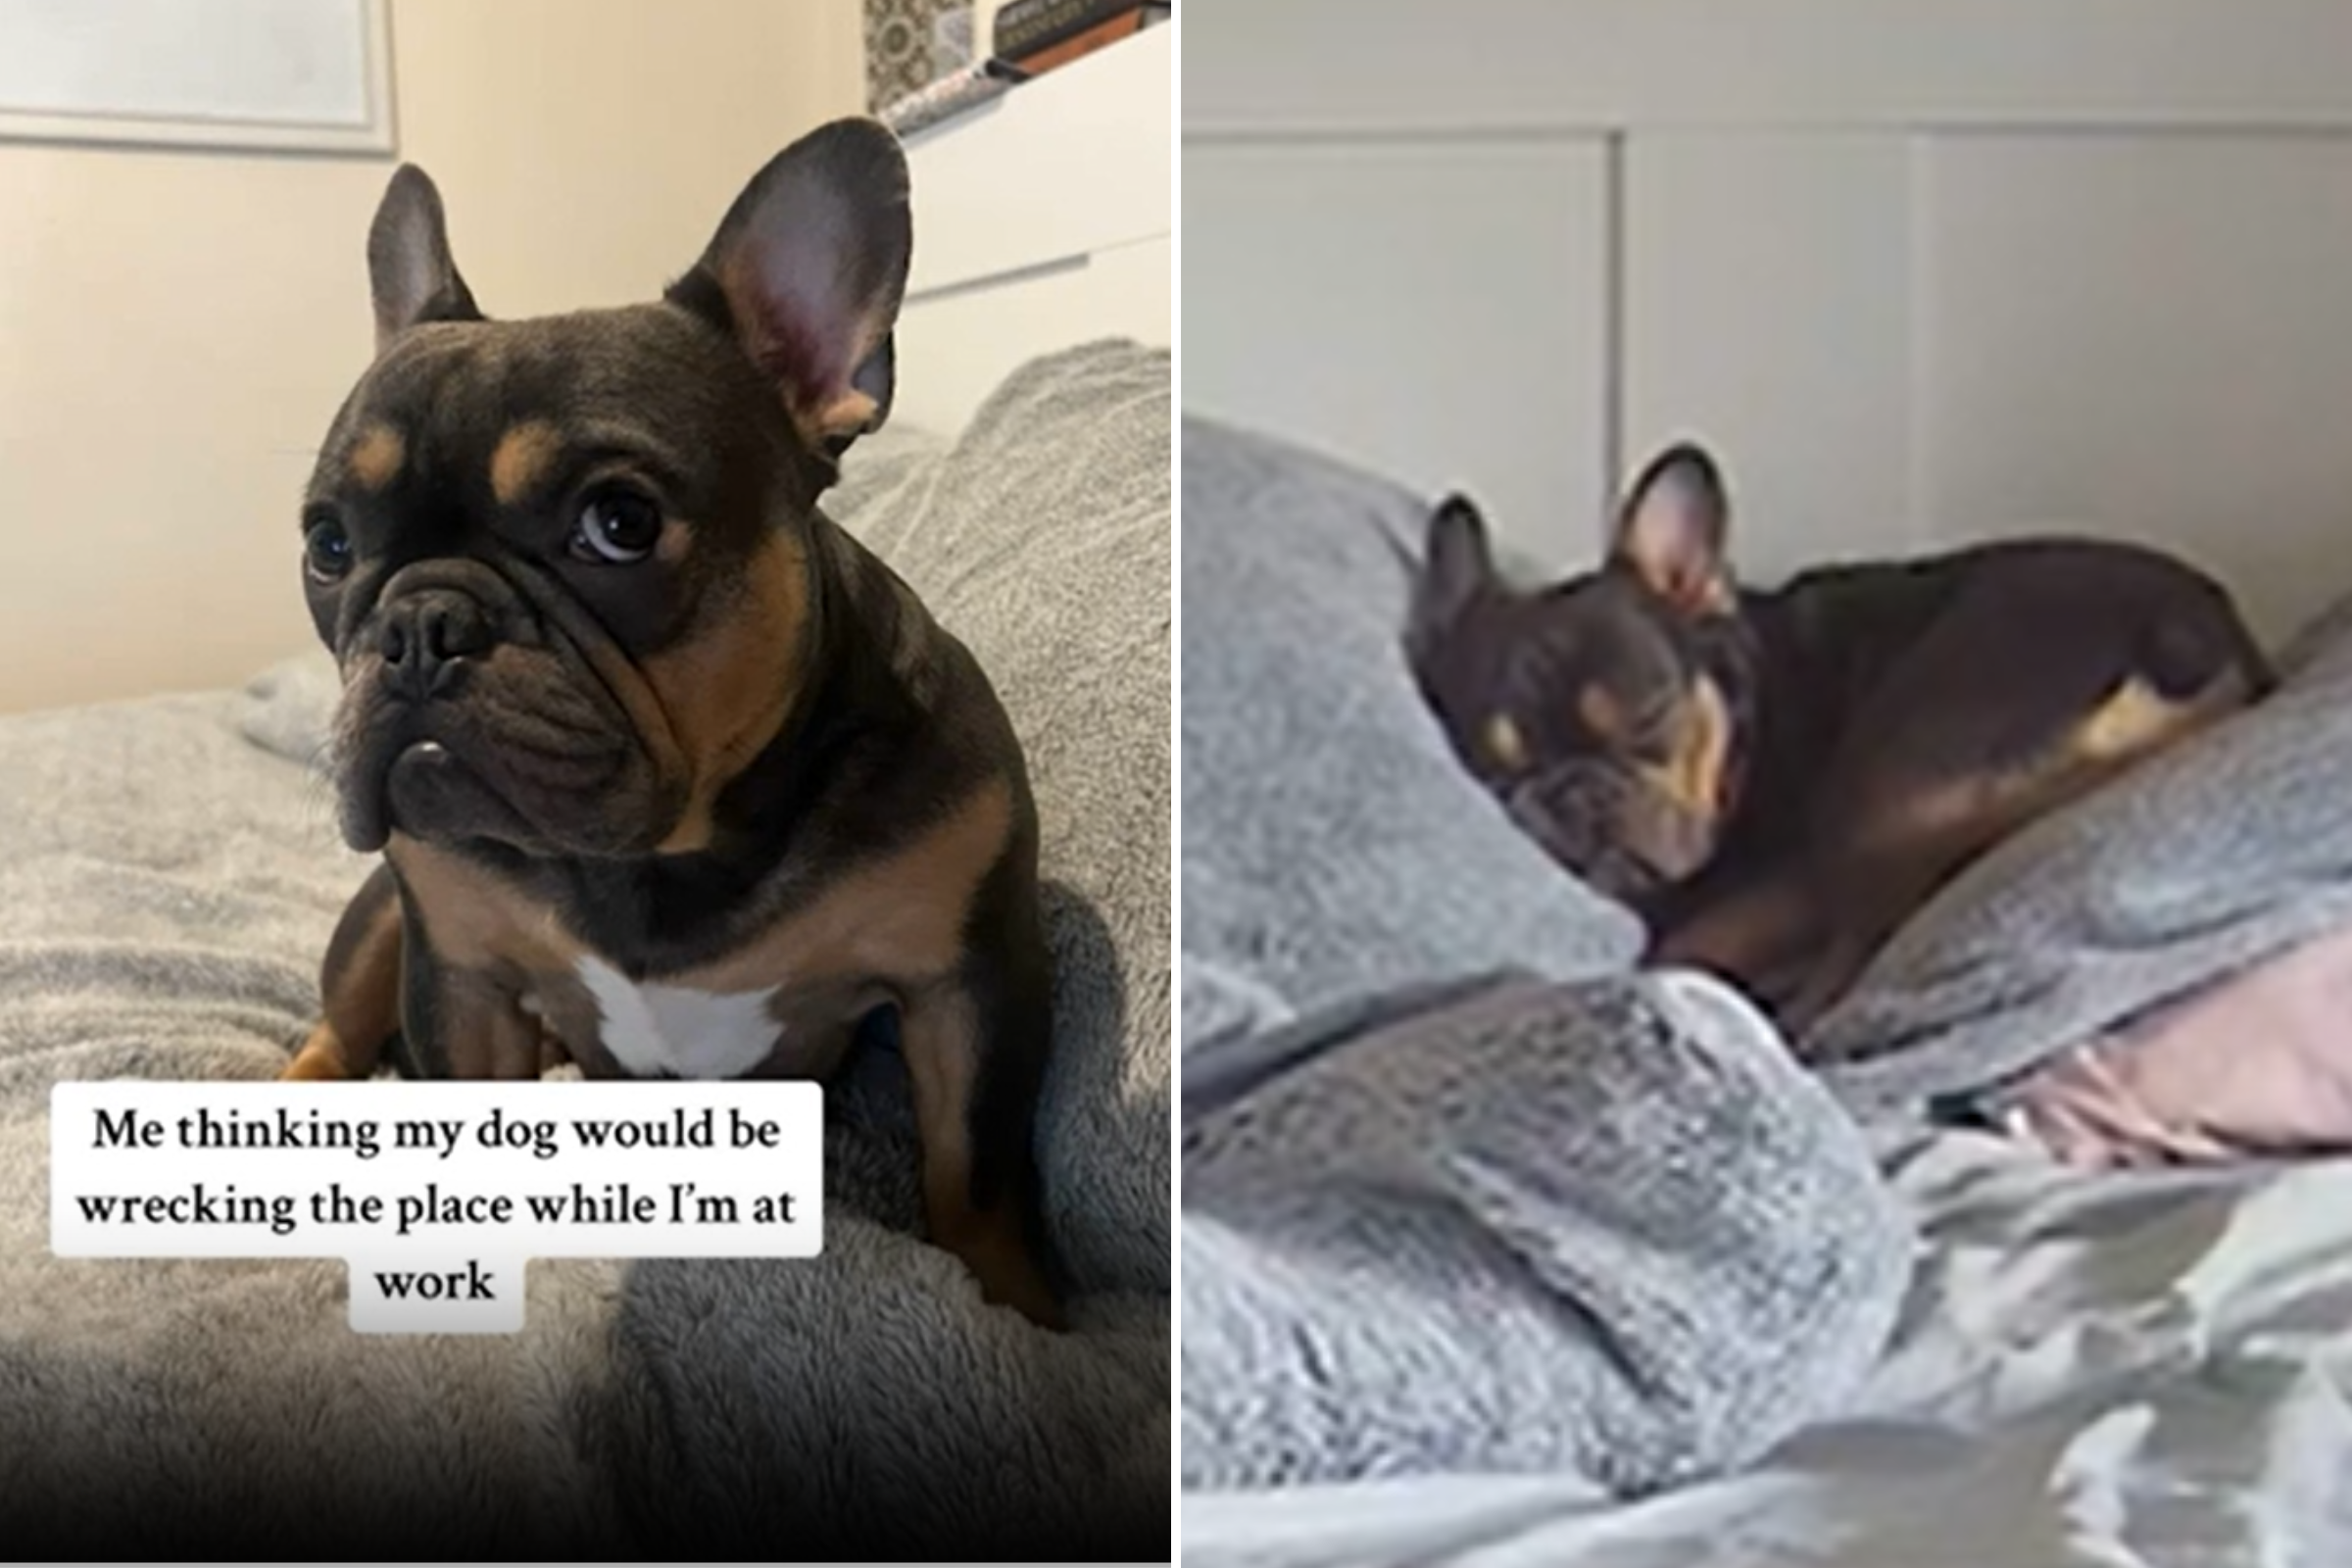 Owner reveals unexpected way French bulldog spends day while she’s at work